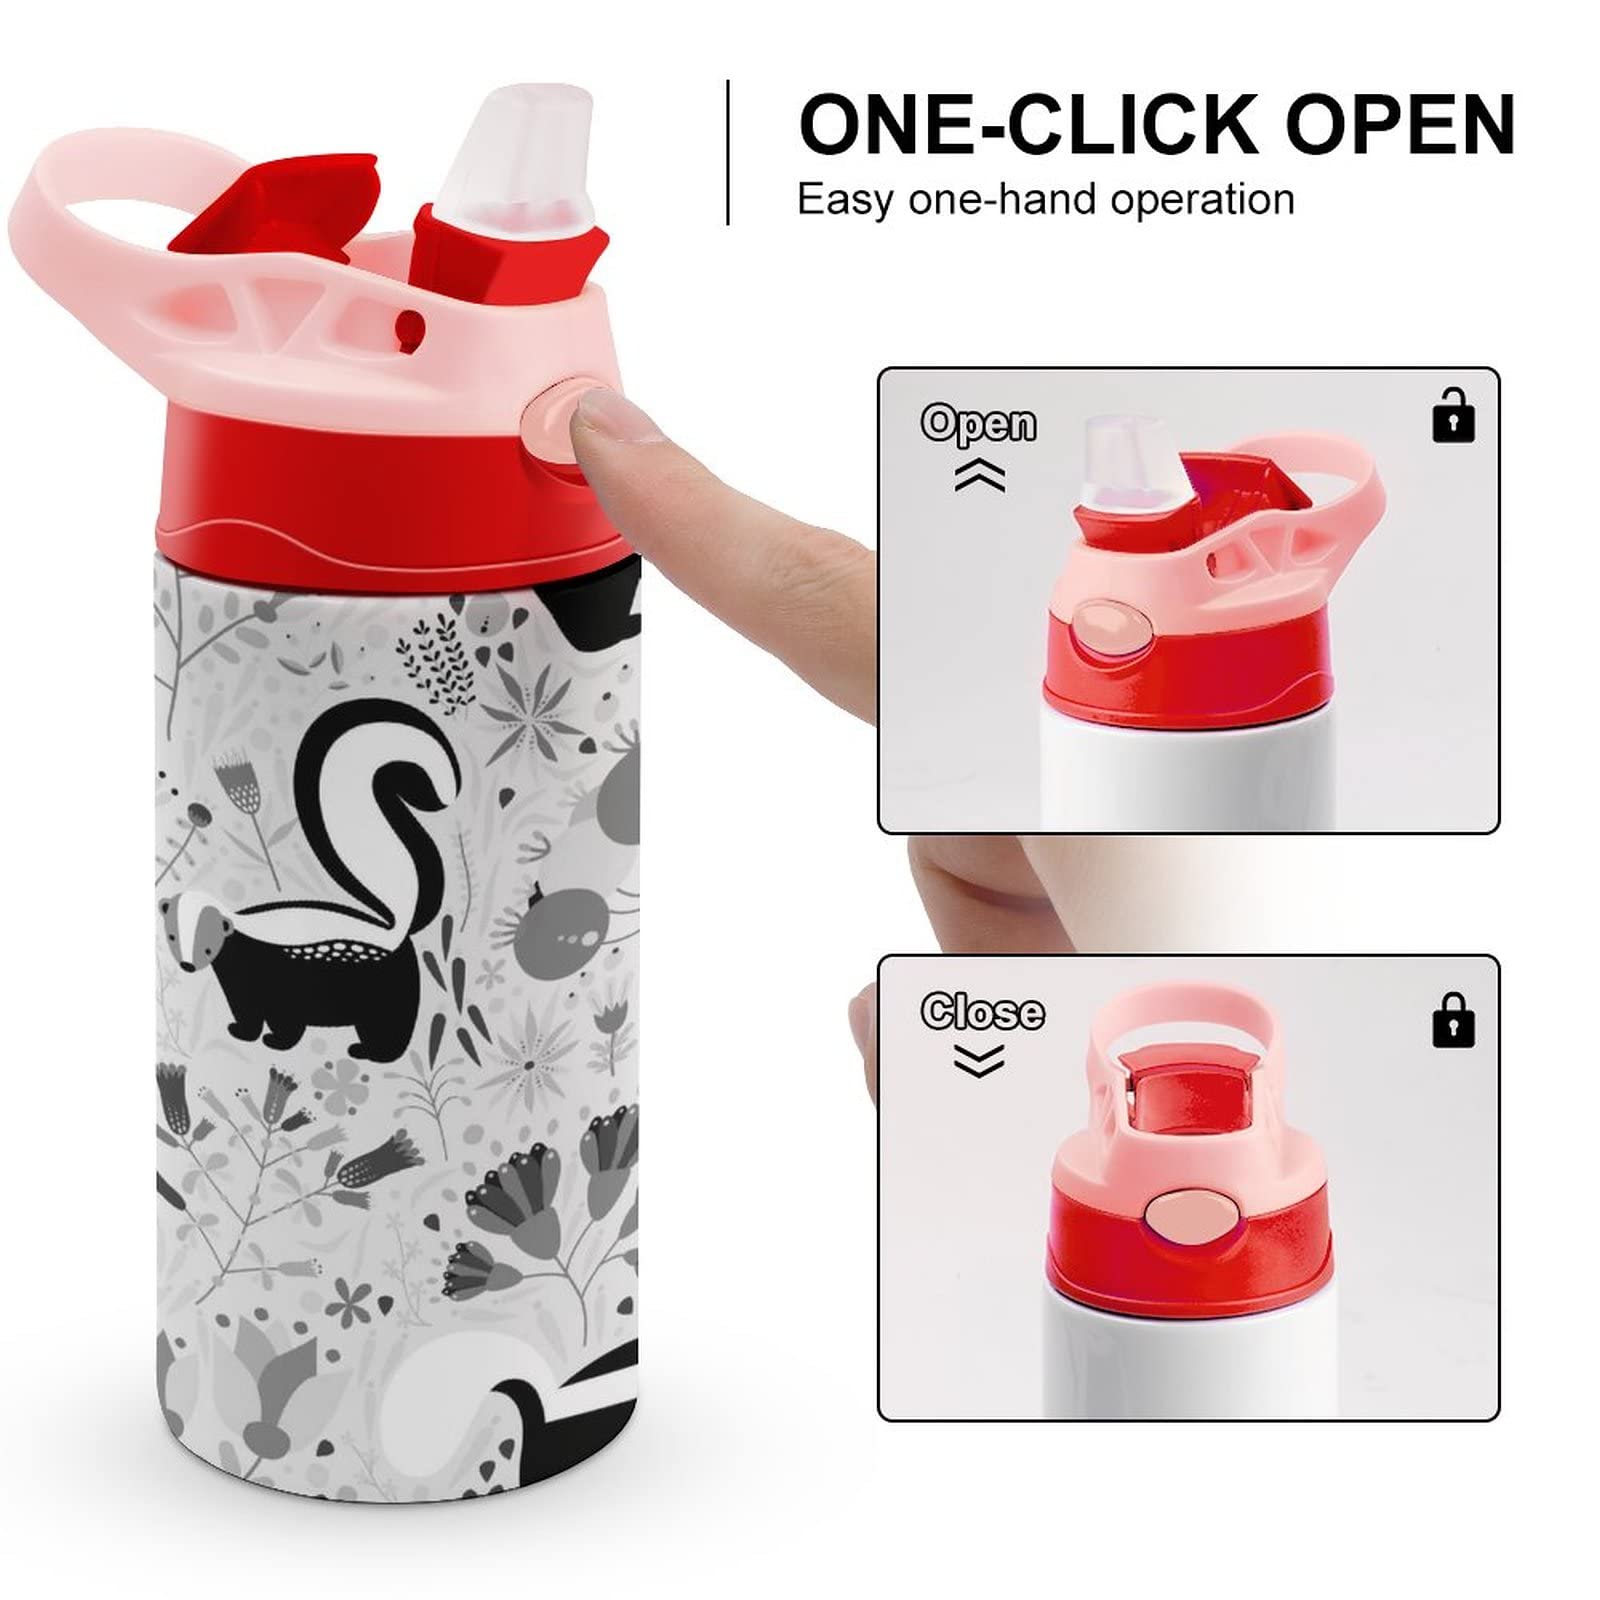 Black White Skunks Floral Flowers Vintage Old Retro Style Stainless Steel Water Bottle, Leak-Proof Hot Cold Travel Mug with Handle Cup Bottle 16.9 Oz, Coffee Mug with Red Straw Lid